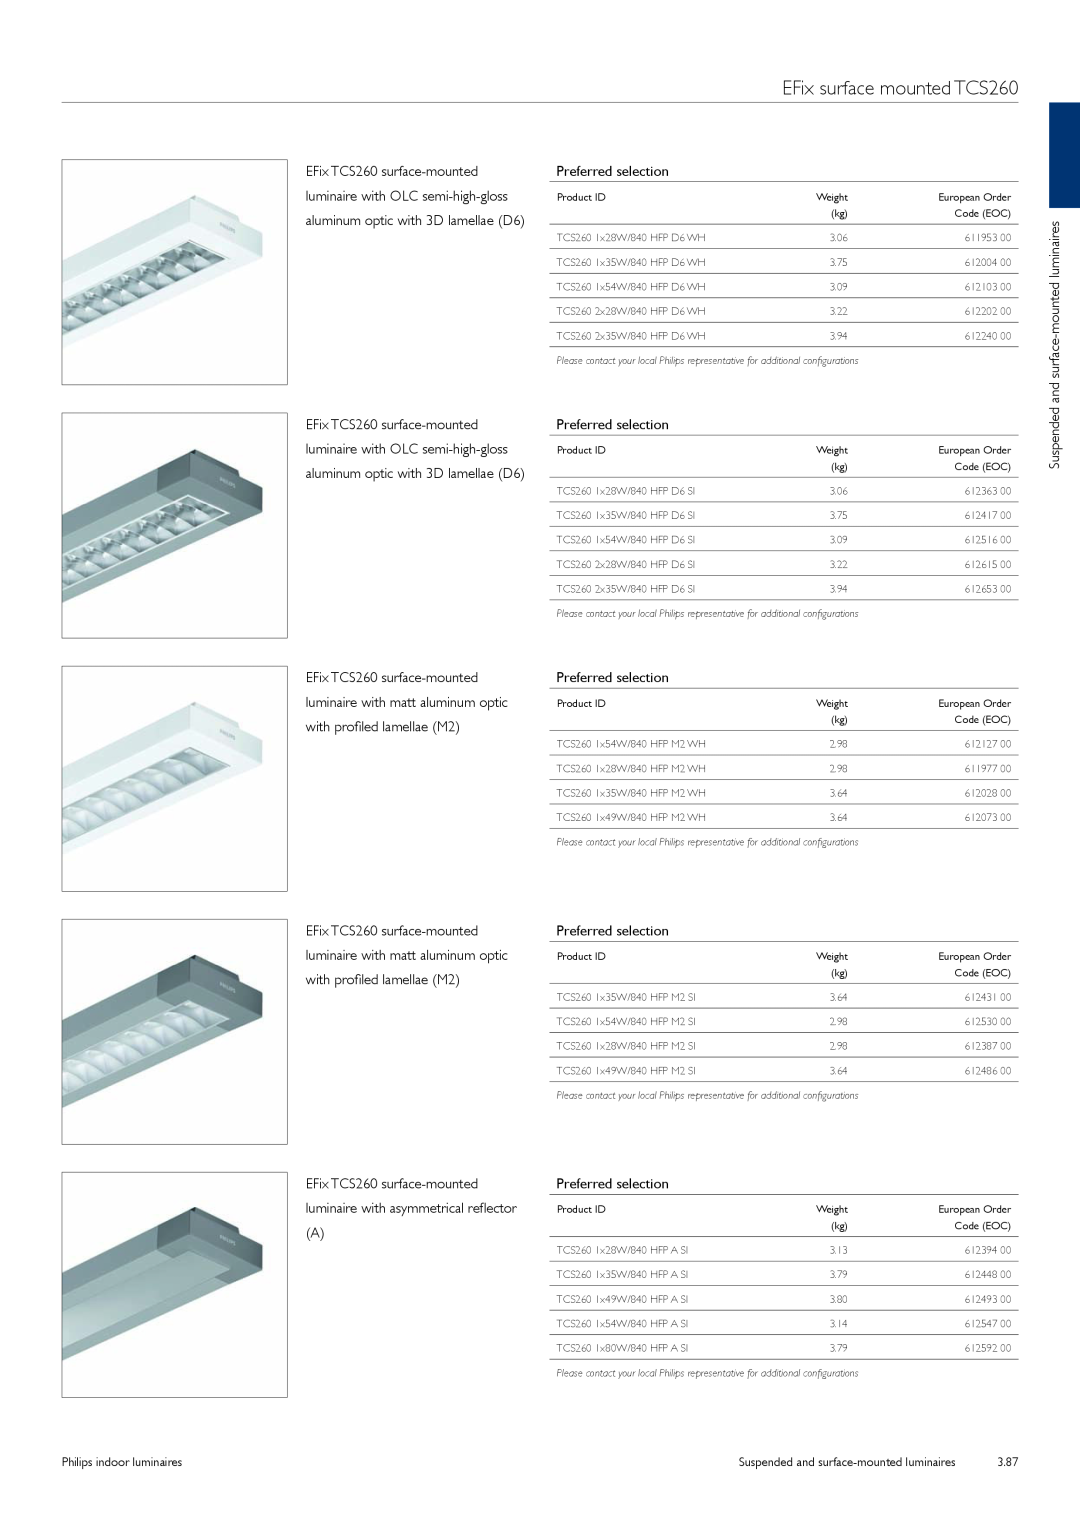 Philips TCS125 manual EFix surface mounted TCS260, Preferred selection, and surface-mountedluminaires 